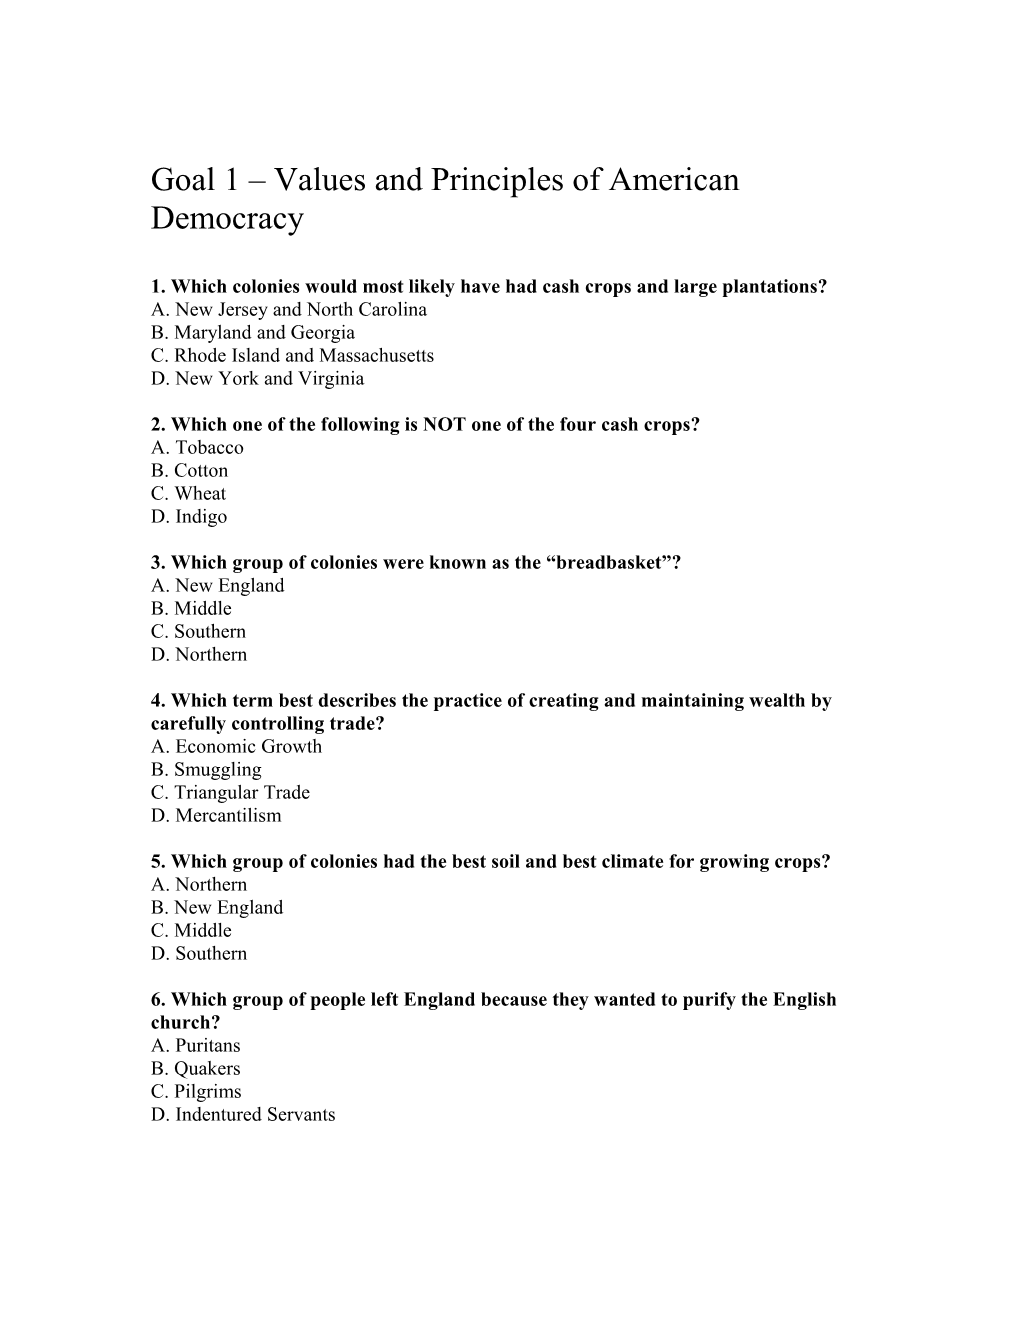 Goal 1 Values and Principles of American Democracy